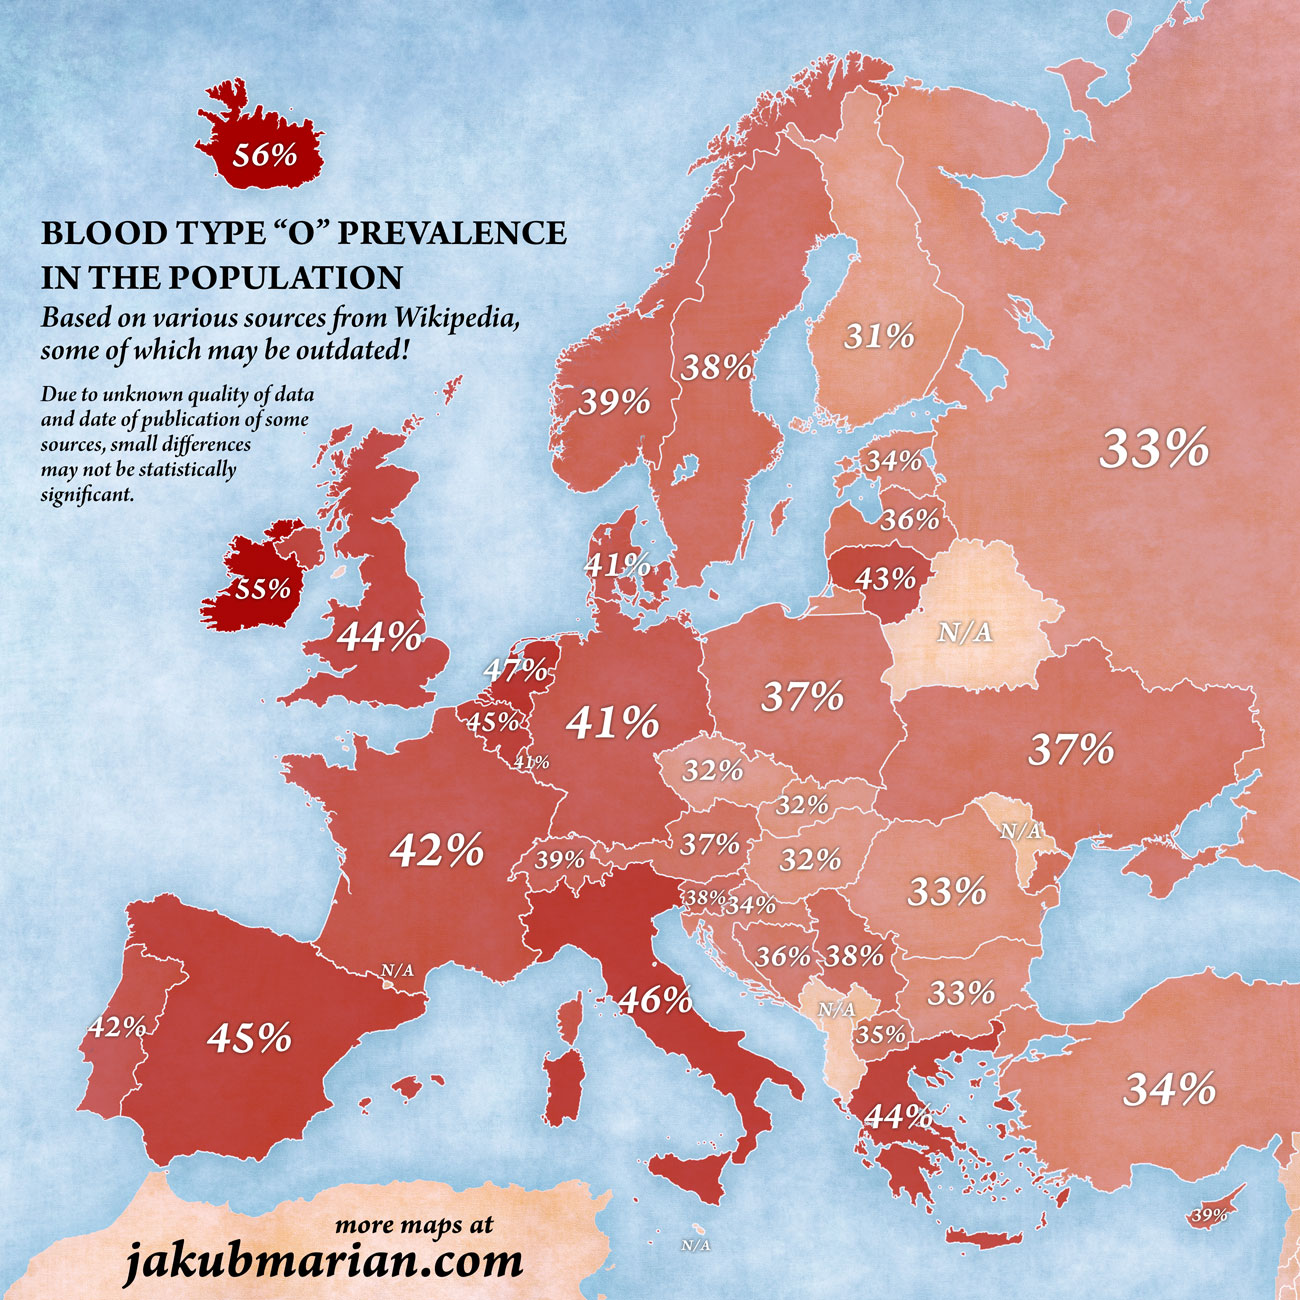 Blood type 0 in Europe